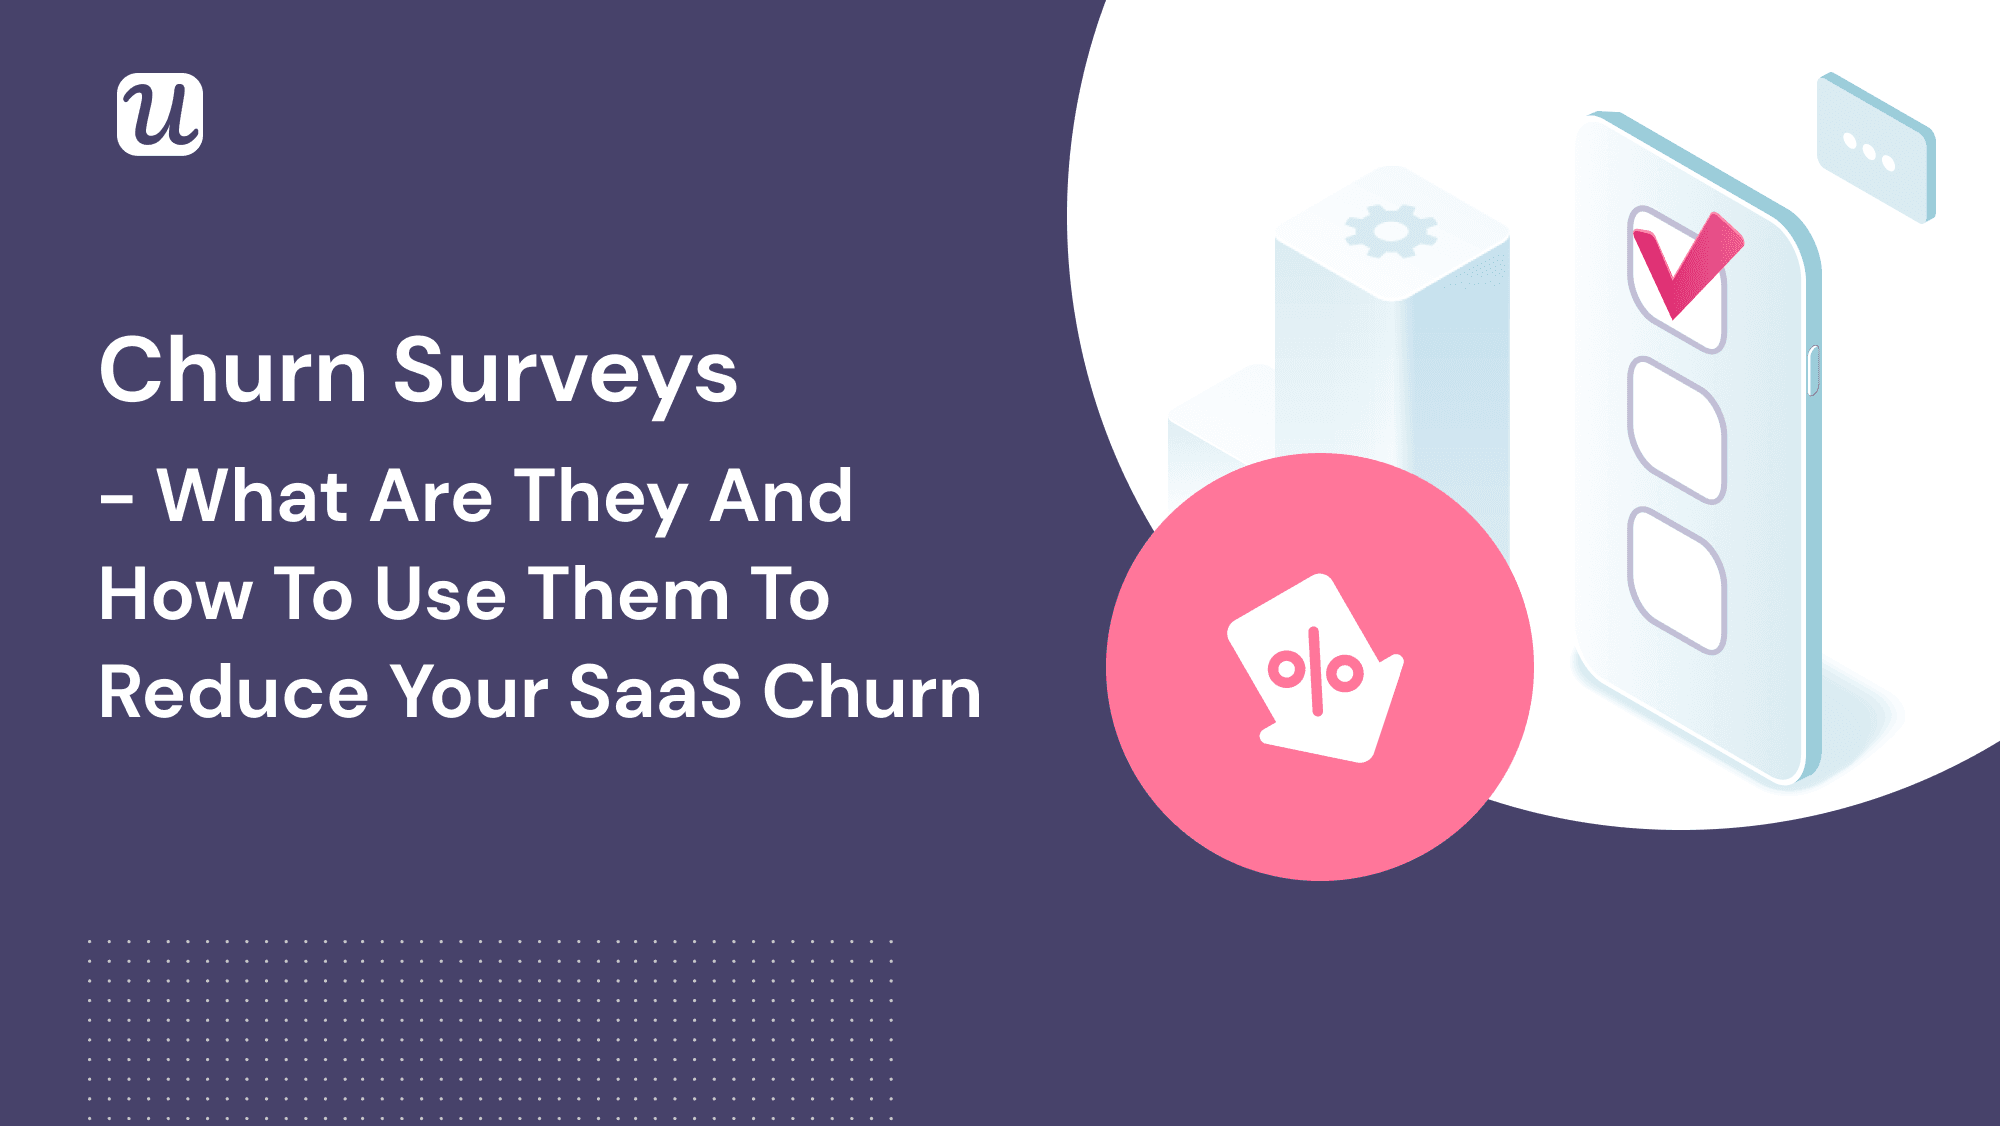 Churn Surveys – What Are They and How to Use Them to Reduce Your SaaS Churn